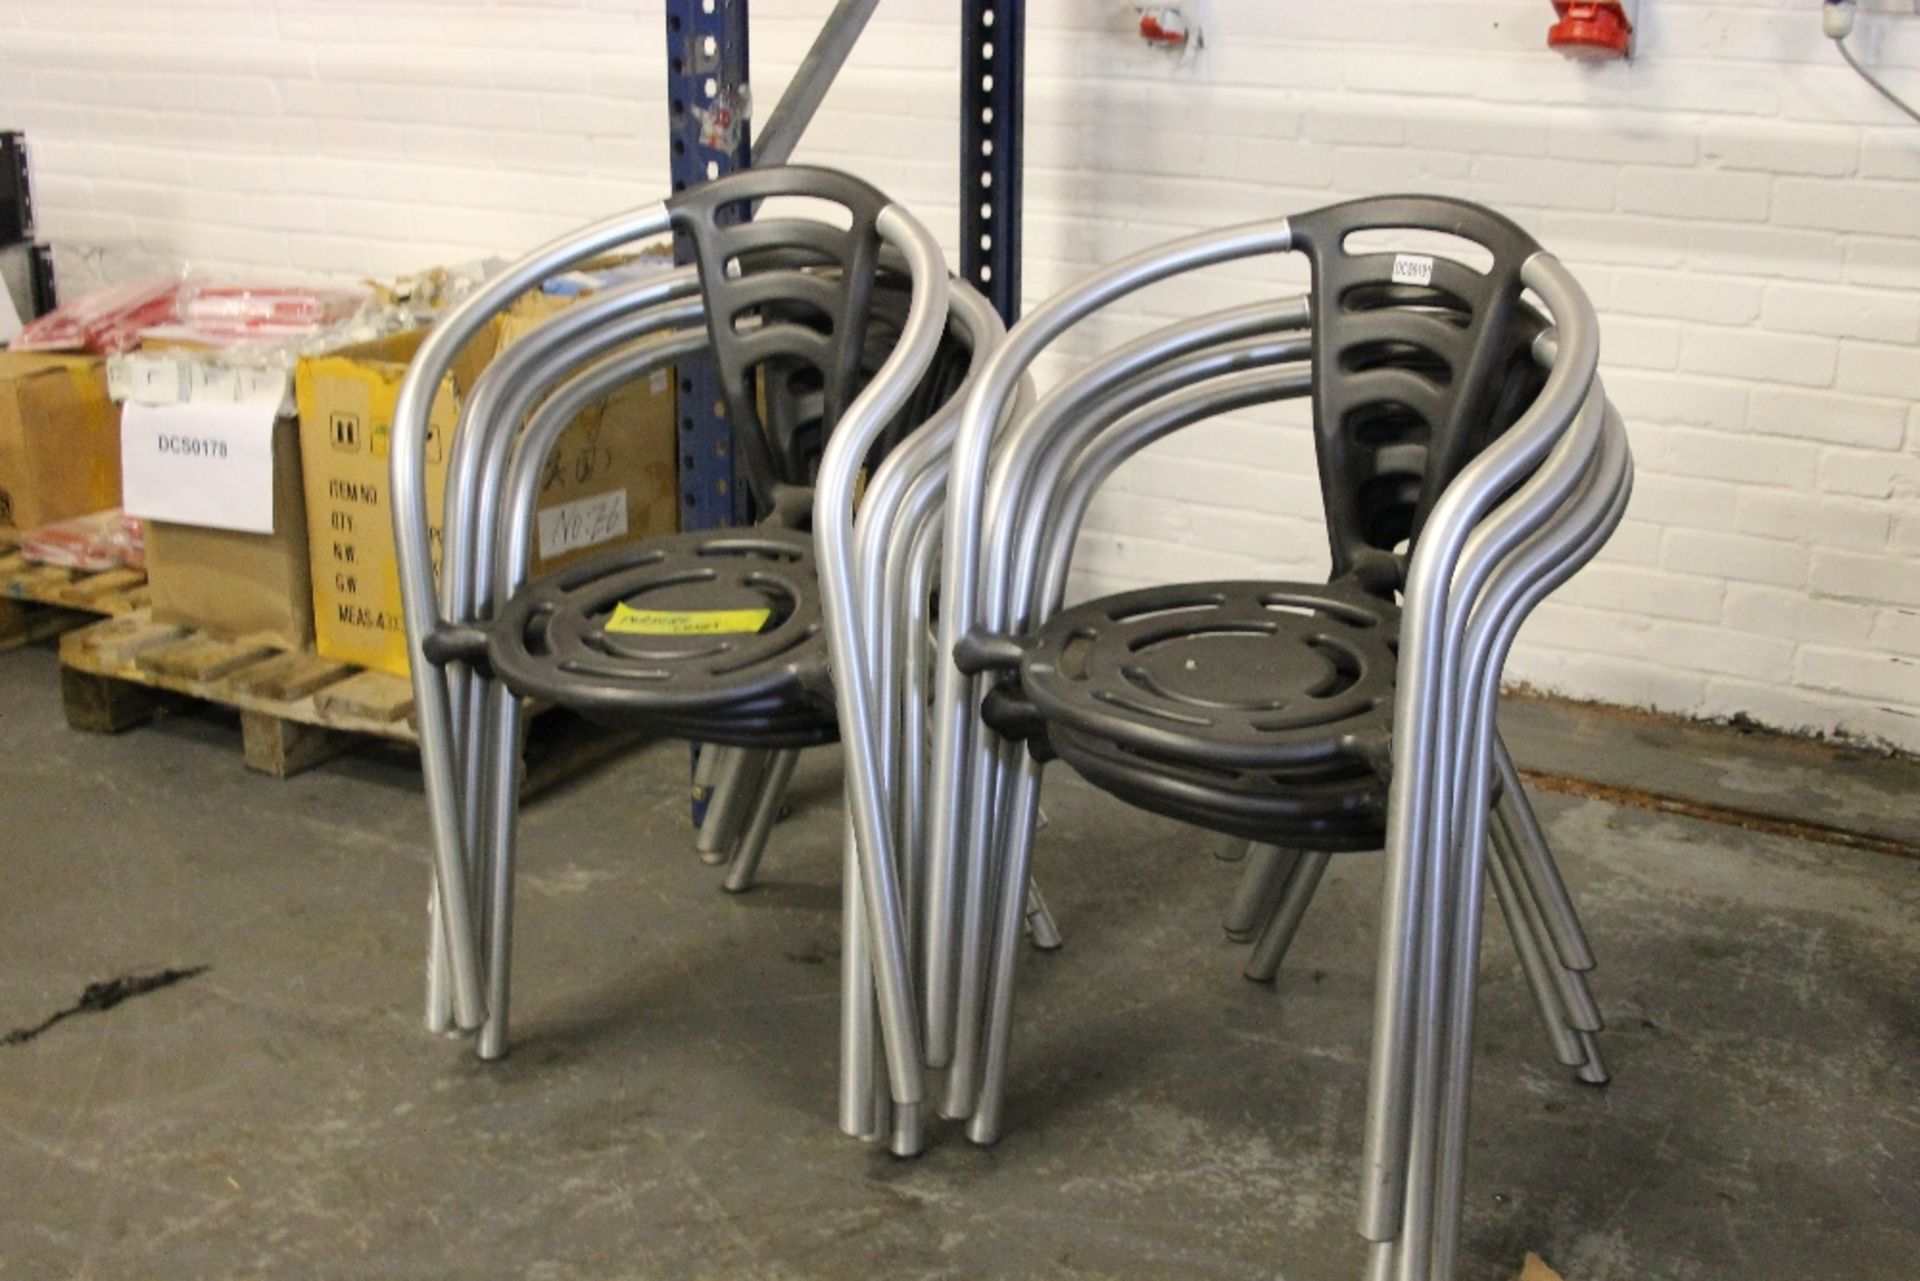 4 Chrome Porsche Designed Chairs – NO VAT Look great in any Car Sales Reception/ Office - Image 2 of 2